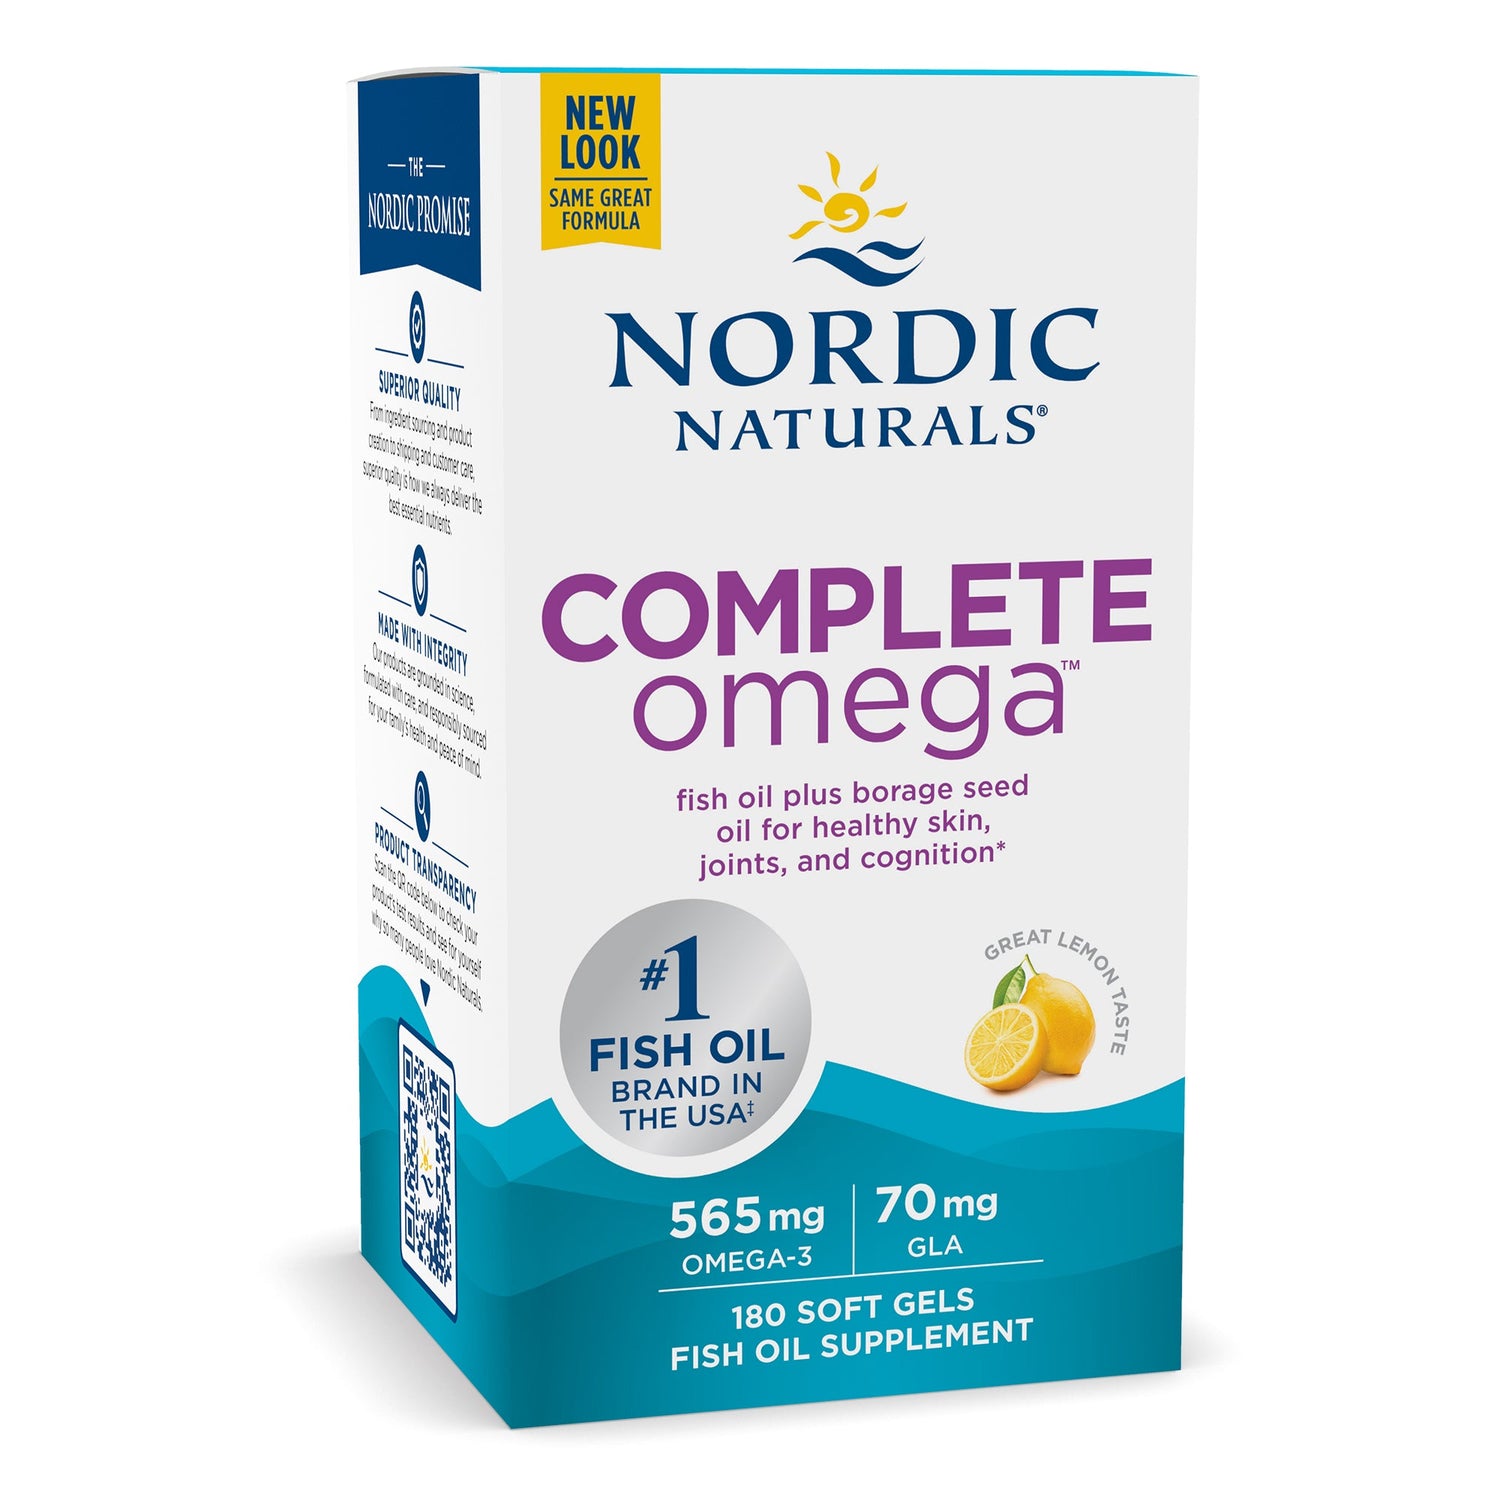 Nordic Naturals Complete Omega-3, 565mg, with Borage Oil and GLA, Lemon Flavour, Laboratory Tested, Soy-Free, Gluten-Free, Softgels